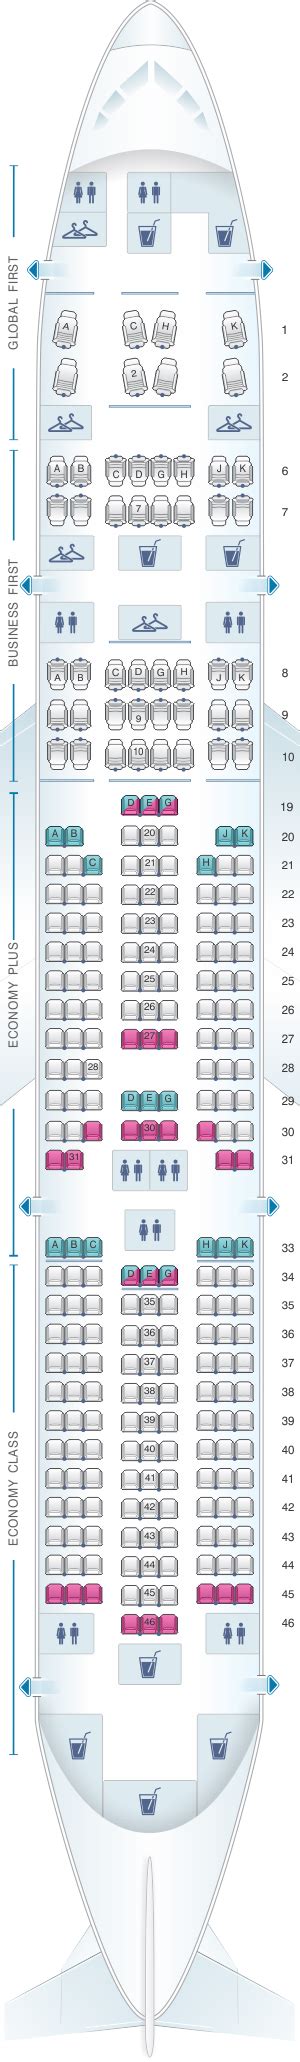 Seat Map and Seating Chart Boeing 777 200 ER V5 United Airlines. This version of Boeing 777-200 may accommodate 364 passengers in three classes: polaris that corresponds to business class, economy plus and economy. This airplane offers 28 flat bed seats that transform into a fully beds. The seats of polaris class are located in the first 4 rows..